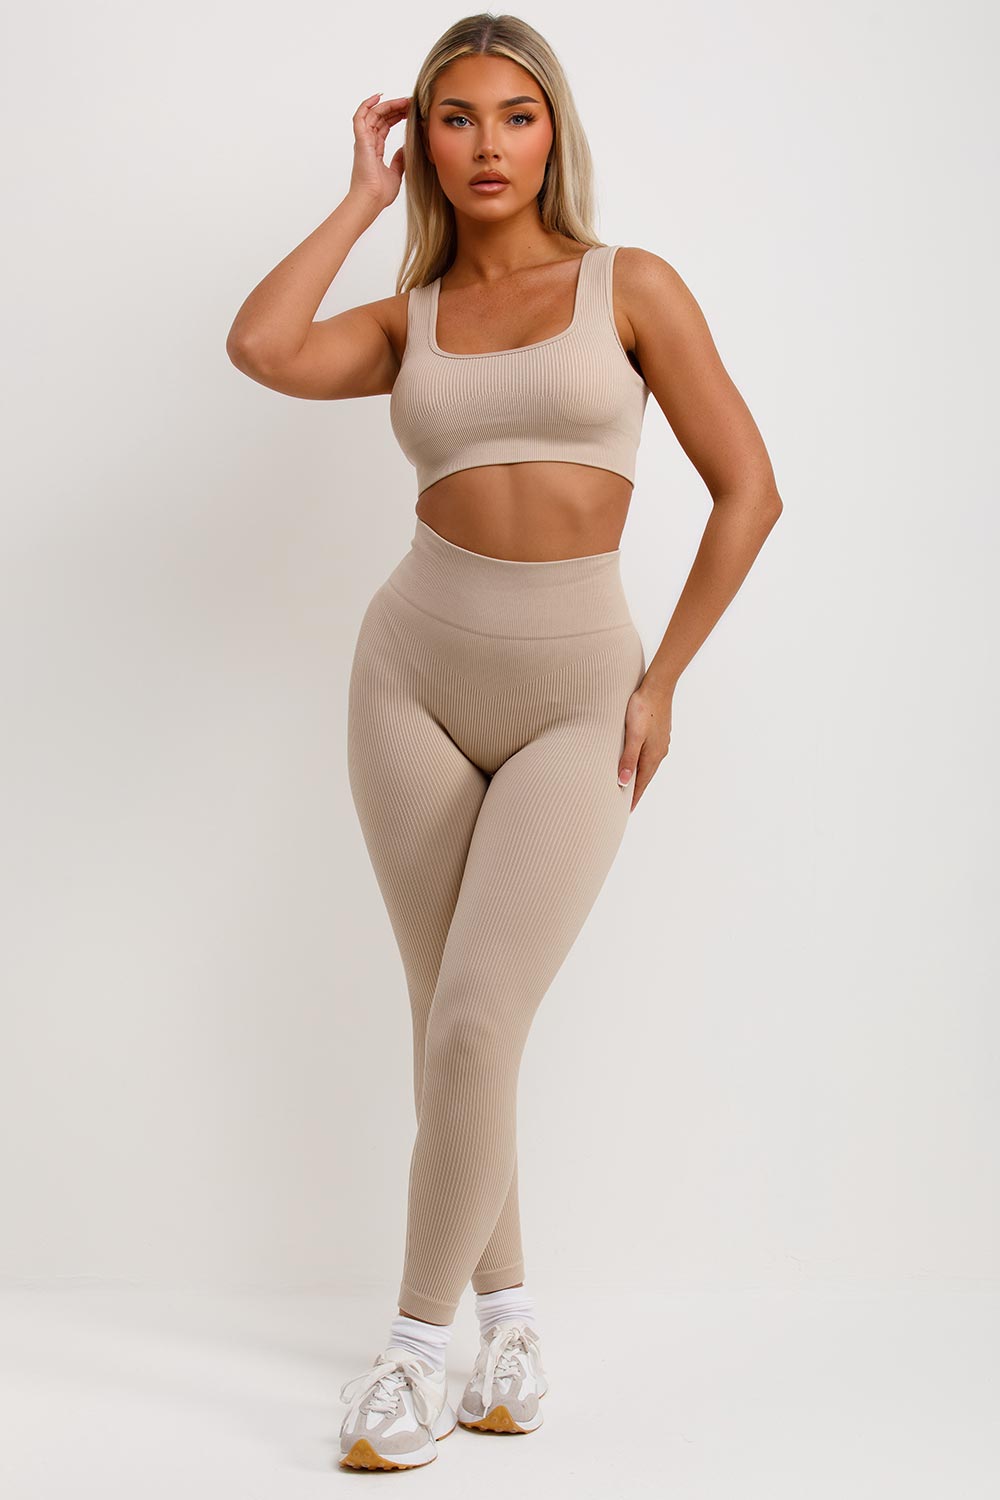 ribbed high waist leggings and crop top co ord set gym wear